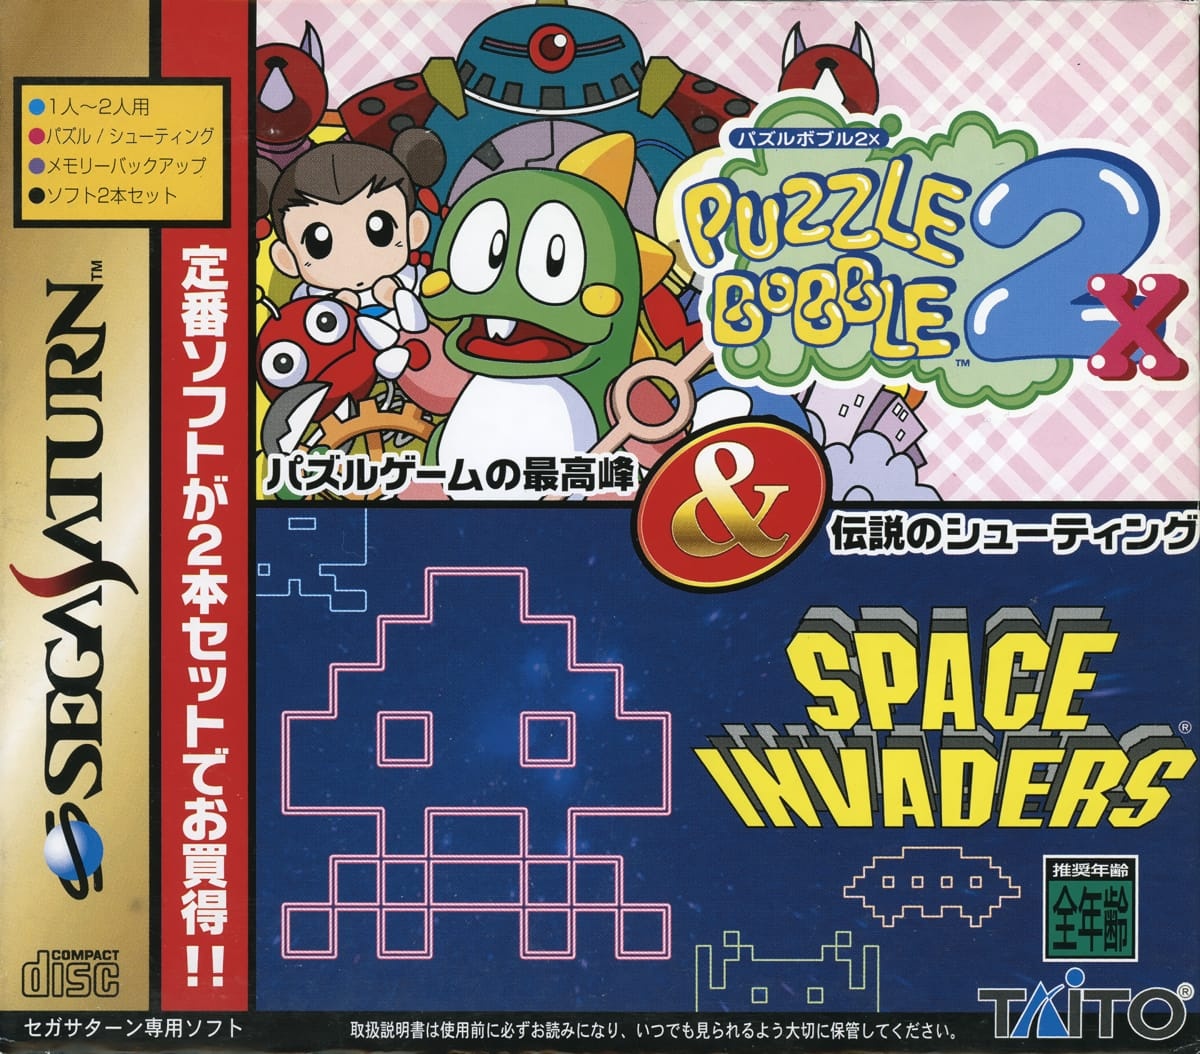 Capa do jogo Puzzle Bobble 2X & Space Invaders